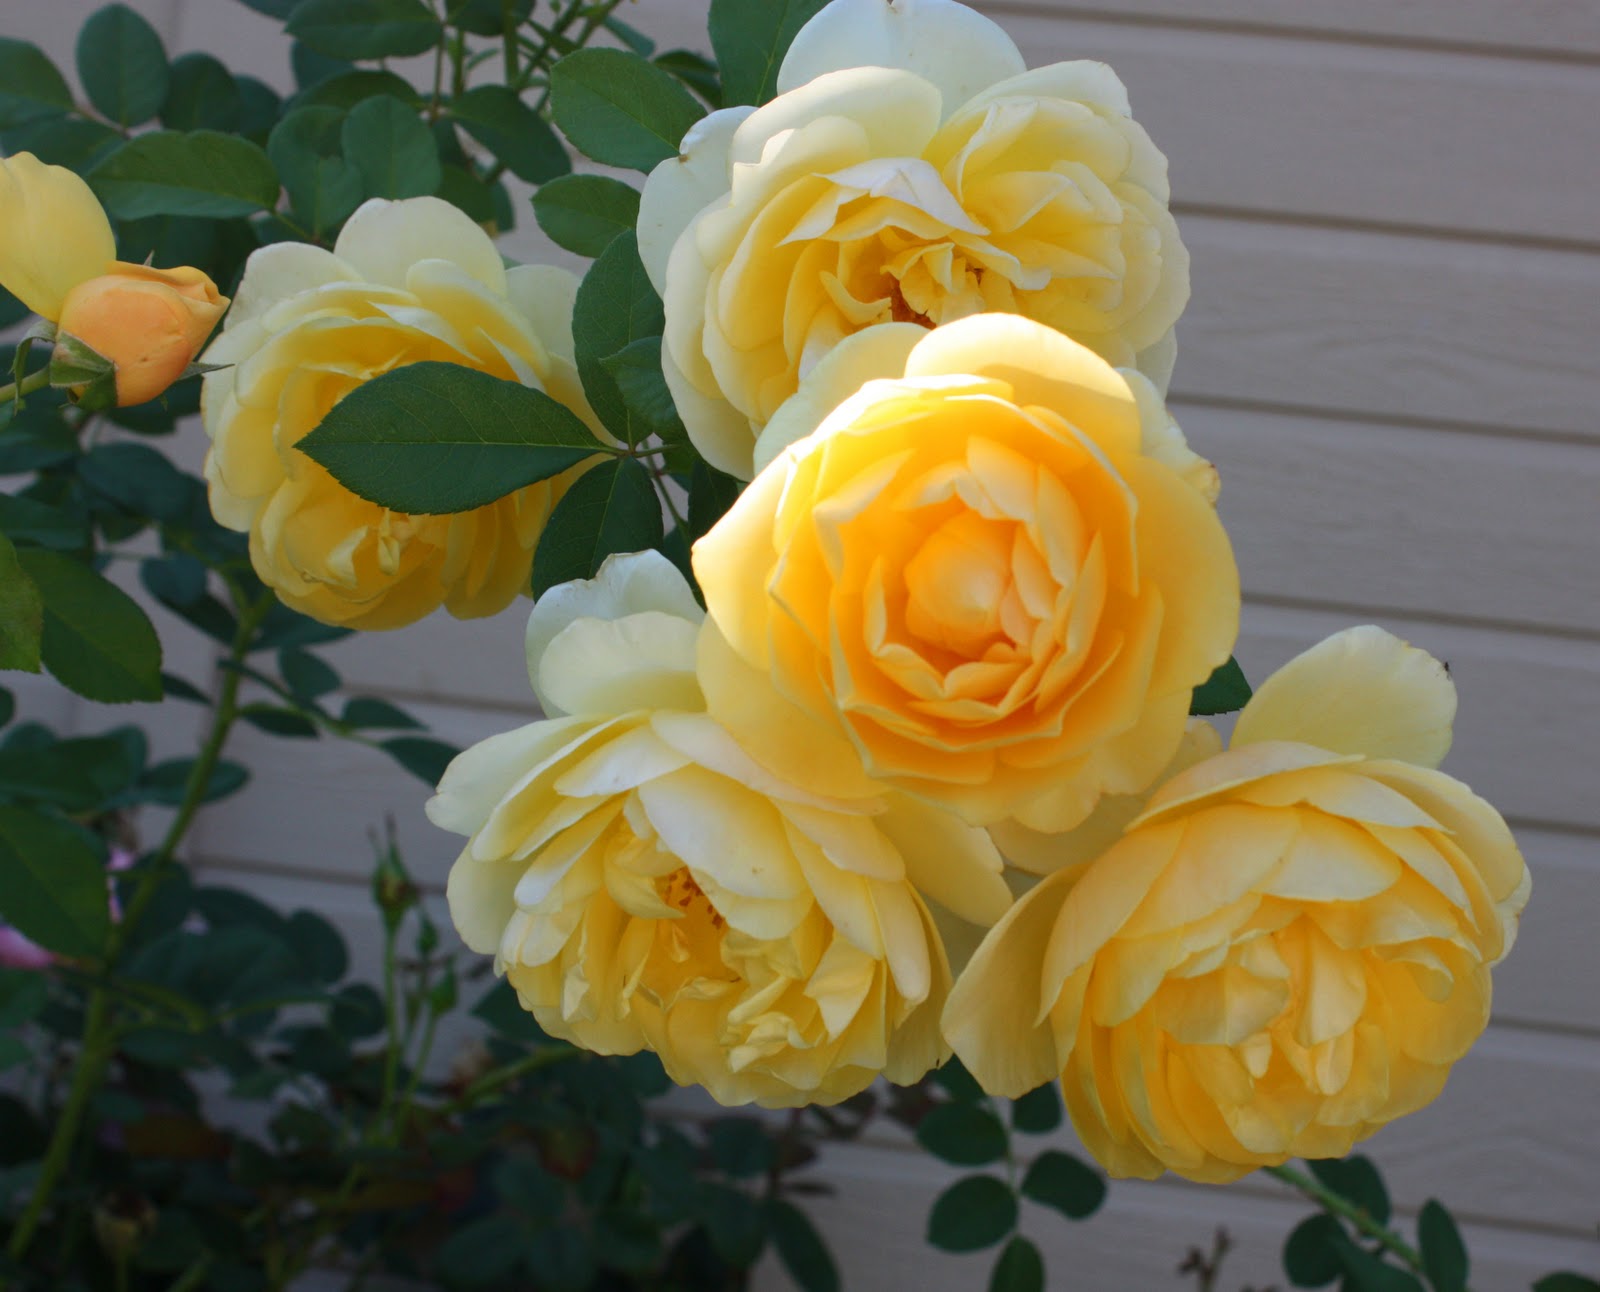 Boise Daily Photo Garden Shot: Autumn Roses are Brightest